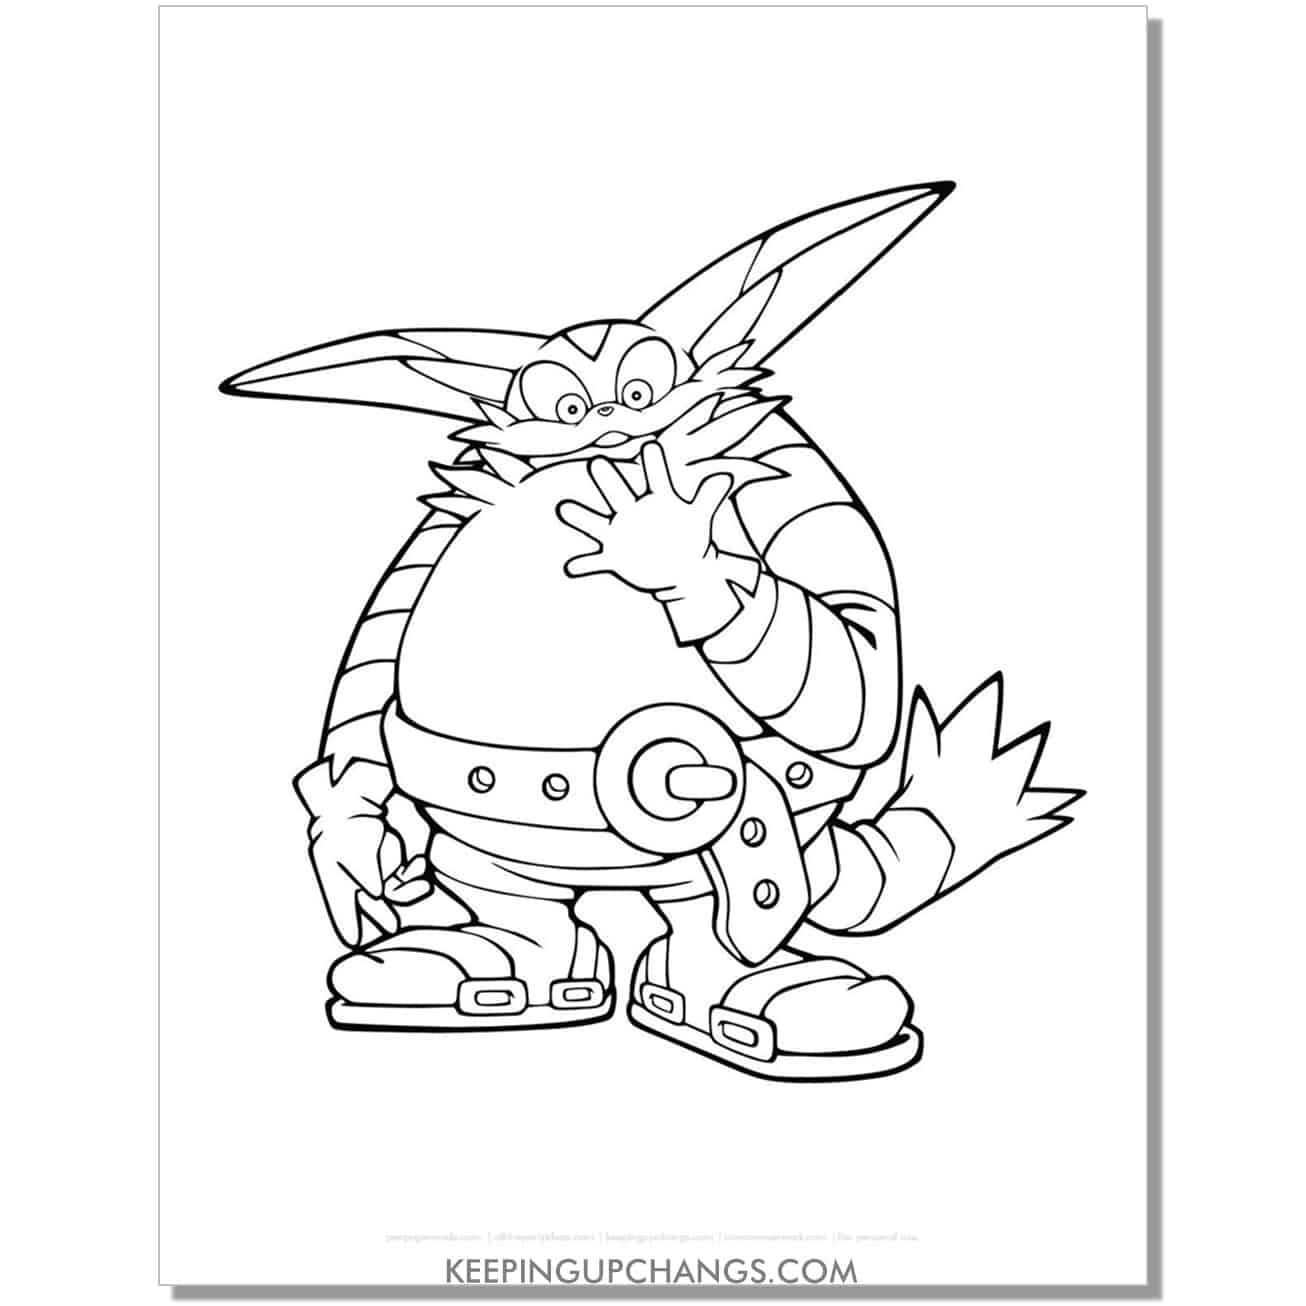 big cat sonic coloring page.